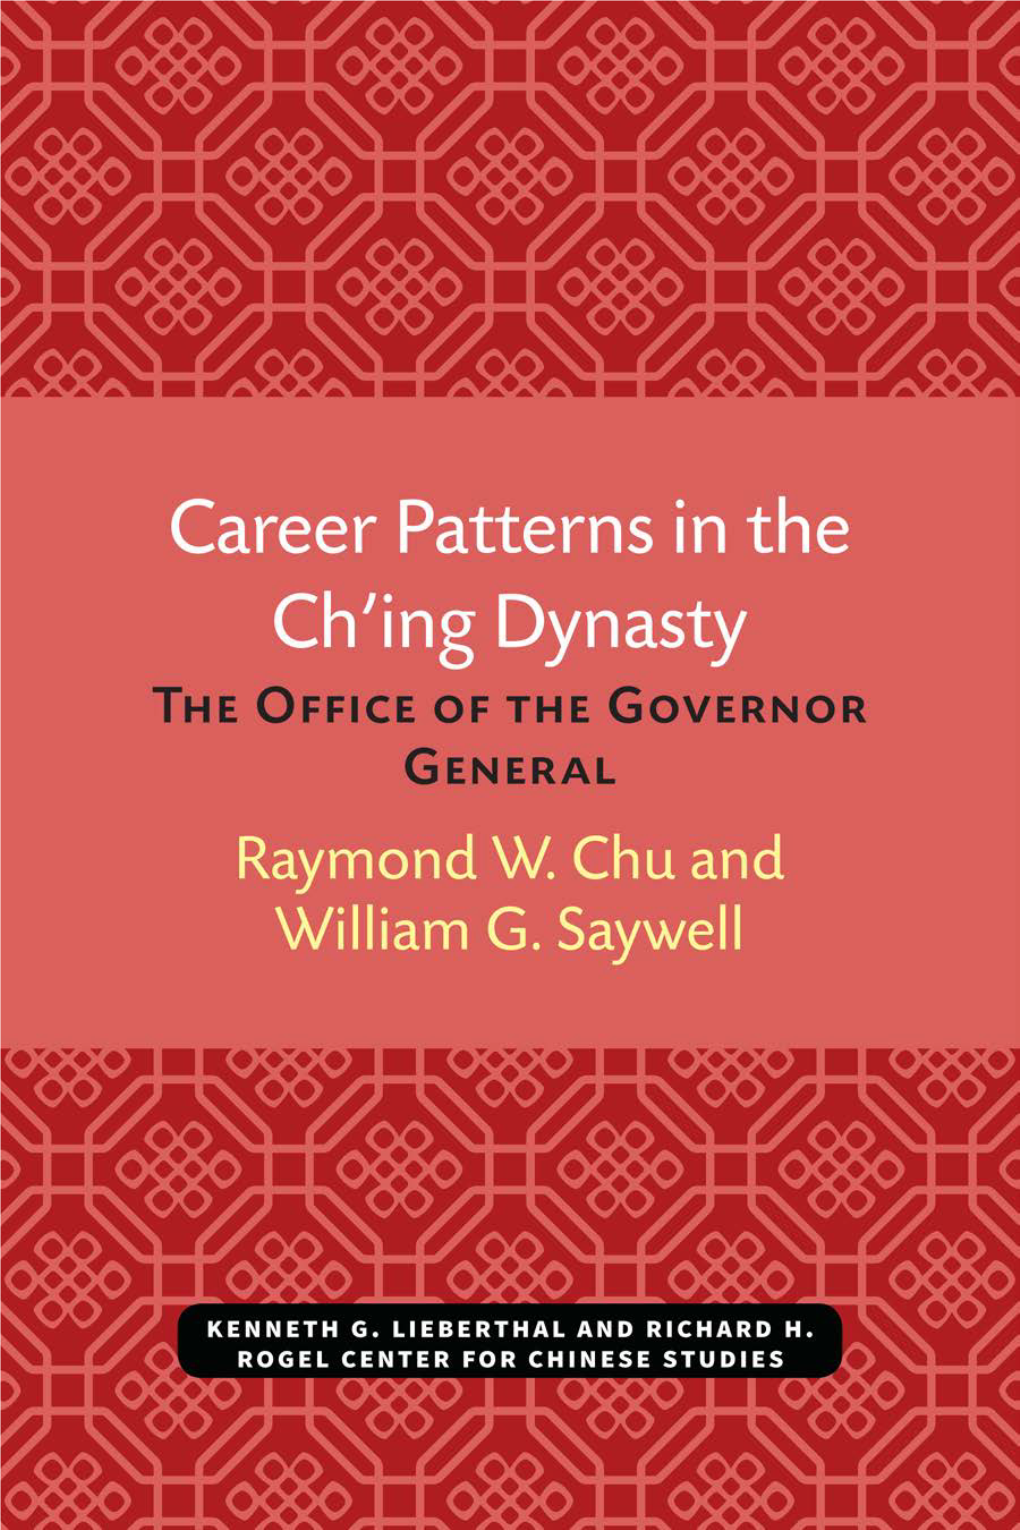 Career Patterns in the Ch'ing Dynasty